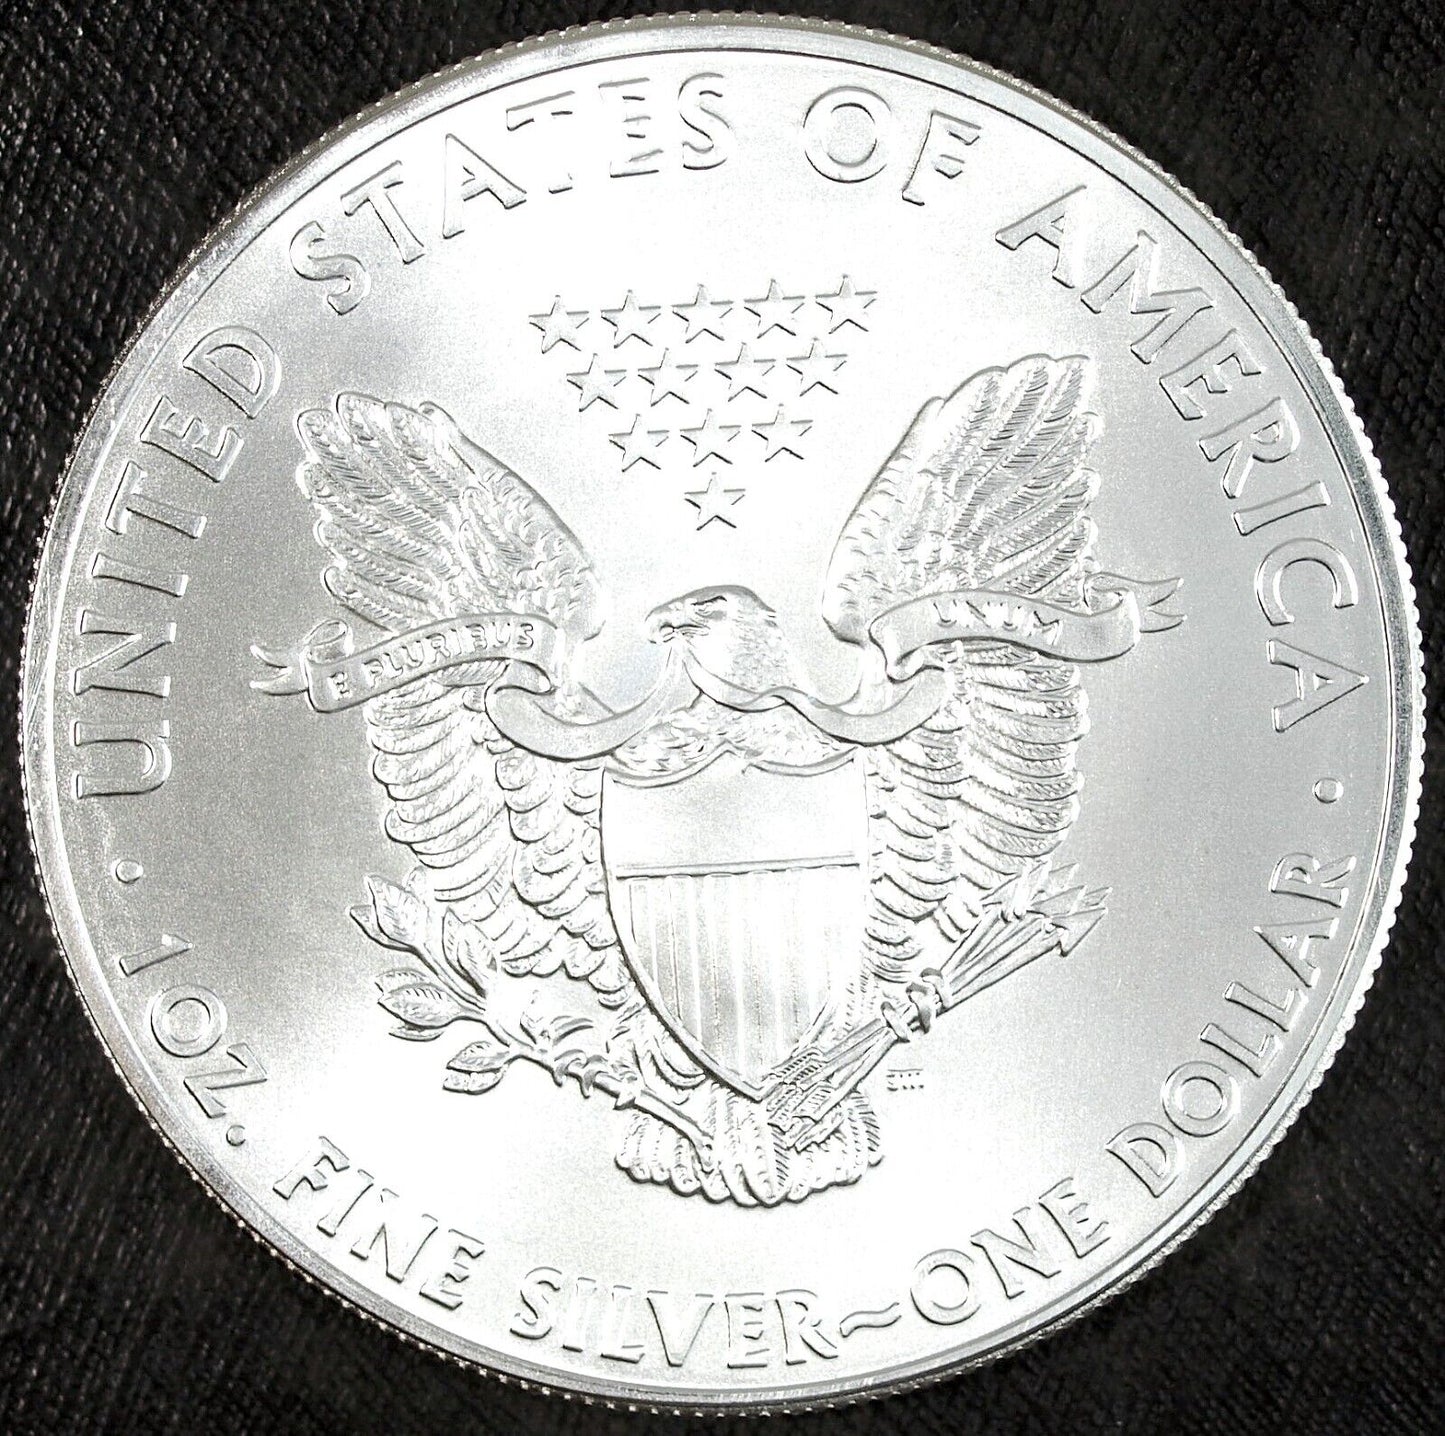 2015 U.S. Mint American Silver Eagle ☆☆ Uncirculated ☆☆ Great Collectible 128